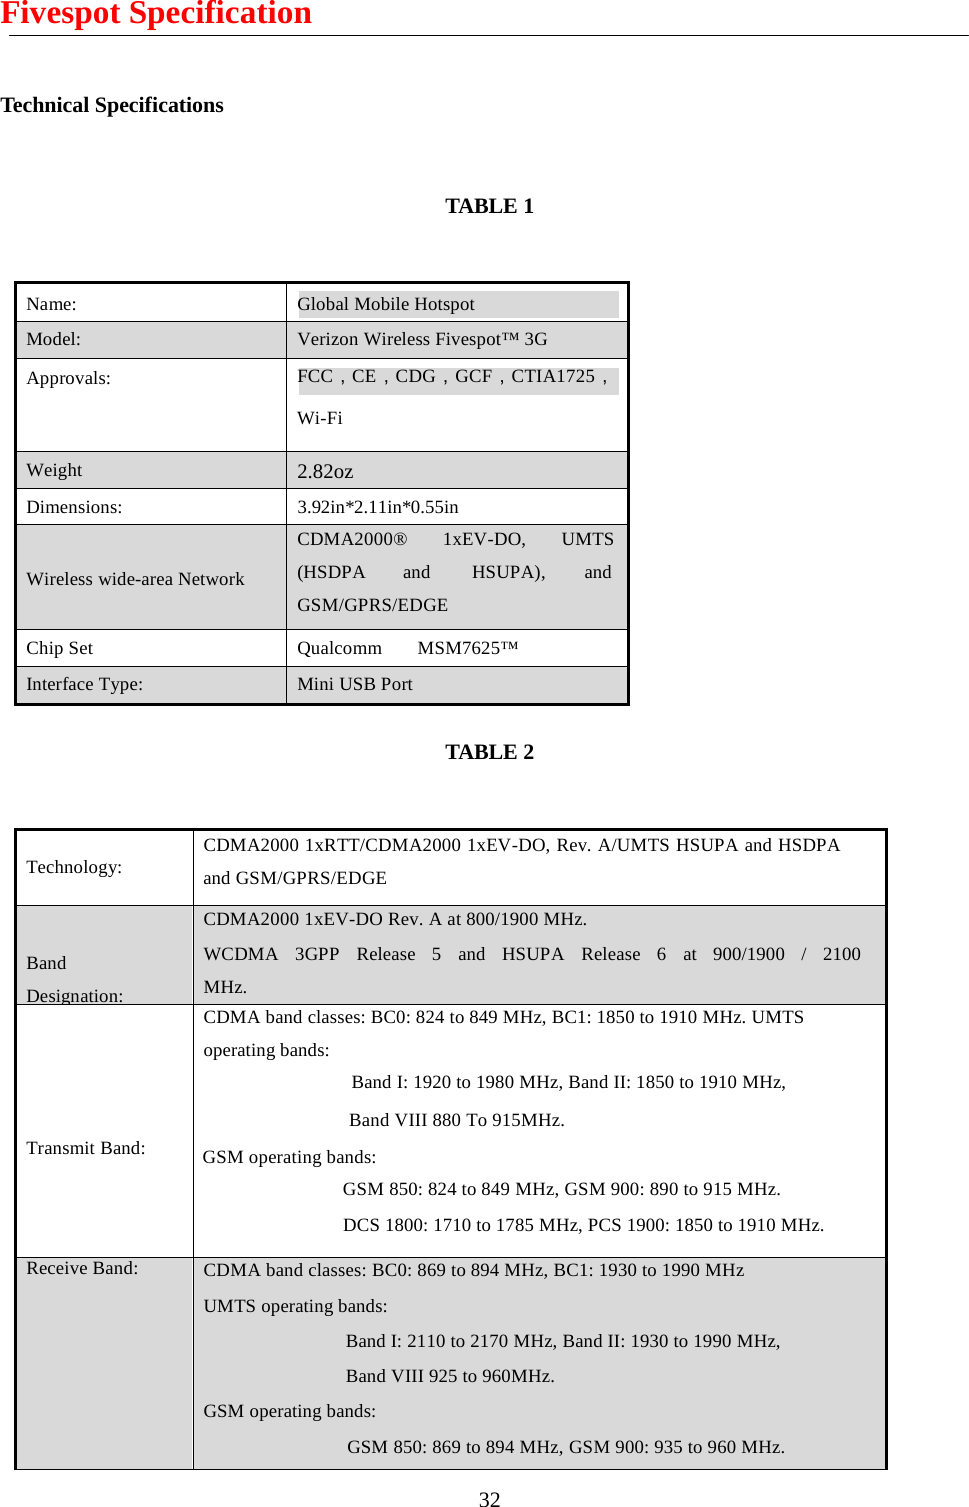 32 Fivespot Specification  Technical Specifications   TABLE 1  Name: Global Mobile Hotspot Model: Verizon Wireless Fivespot™ 3G Approvals: FCC，CE，CDG，GCF，CTIA1725，Wi-Fi Weight 2.82oz Dimensions: 3.92in*2.11in*0.55in  Wireless wide-area Network CDMA2000® 1xEV-DO, UMTS (HSDPA and HSUPA),  and GSM/GPRS/EDGE Chip Set Qualcomm  MSM7625™ Interface Type: Mini USB Port  TABLE 2   Technology: CDMA2000 1xRTT/CDMA2000 1xEV-DO, Rev. A/UMTS HSUPA and HSDPA and GSM/GPRS/EDGE  Band Designation: CDMA2000 1xEV-DO Rev. A at 800/1900 MHz. WCDMA   3GPP   Release   5    and   HSUPA   Release   6    at   900/1900   /   2100 MHz.                  Transmit Band: CDMA band classes: BC0: 824 to 849 MHz, BC1: 1850 to 1910 MHz. UMTS operating bands: Band I: 1920 to 1980 MHz, Band II: 1850 to 1910 MHz, Band VIII 880 To 915MHz.   GSM operating bands: GSM 850: 824 to 849 MHz, GSM 900: 890 to 915 MHz. DCS 1800: 1710 to 1785 MHz, PCS 1900: 1850 to 1910 MHz. Receive Band: CDMA band classes: BC0: 869 to 894 MHz, BC1: 1930 to 1990 MHz UMTS operating bands: Band I: 2110 to 2170 MHz, Band II: 1930 to 1990 MHz, Band VIII 925 to 960MHz. GSM operating bands: GSM 850: 869 to 894 MHz, GSM 900: 935 to 960 MHz.                        